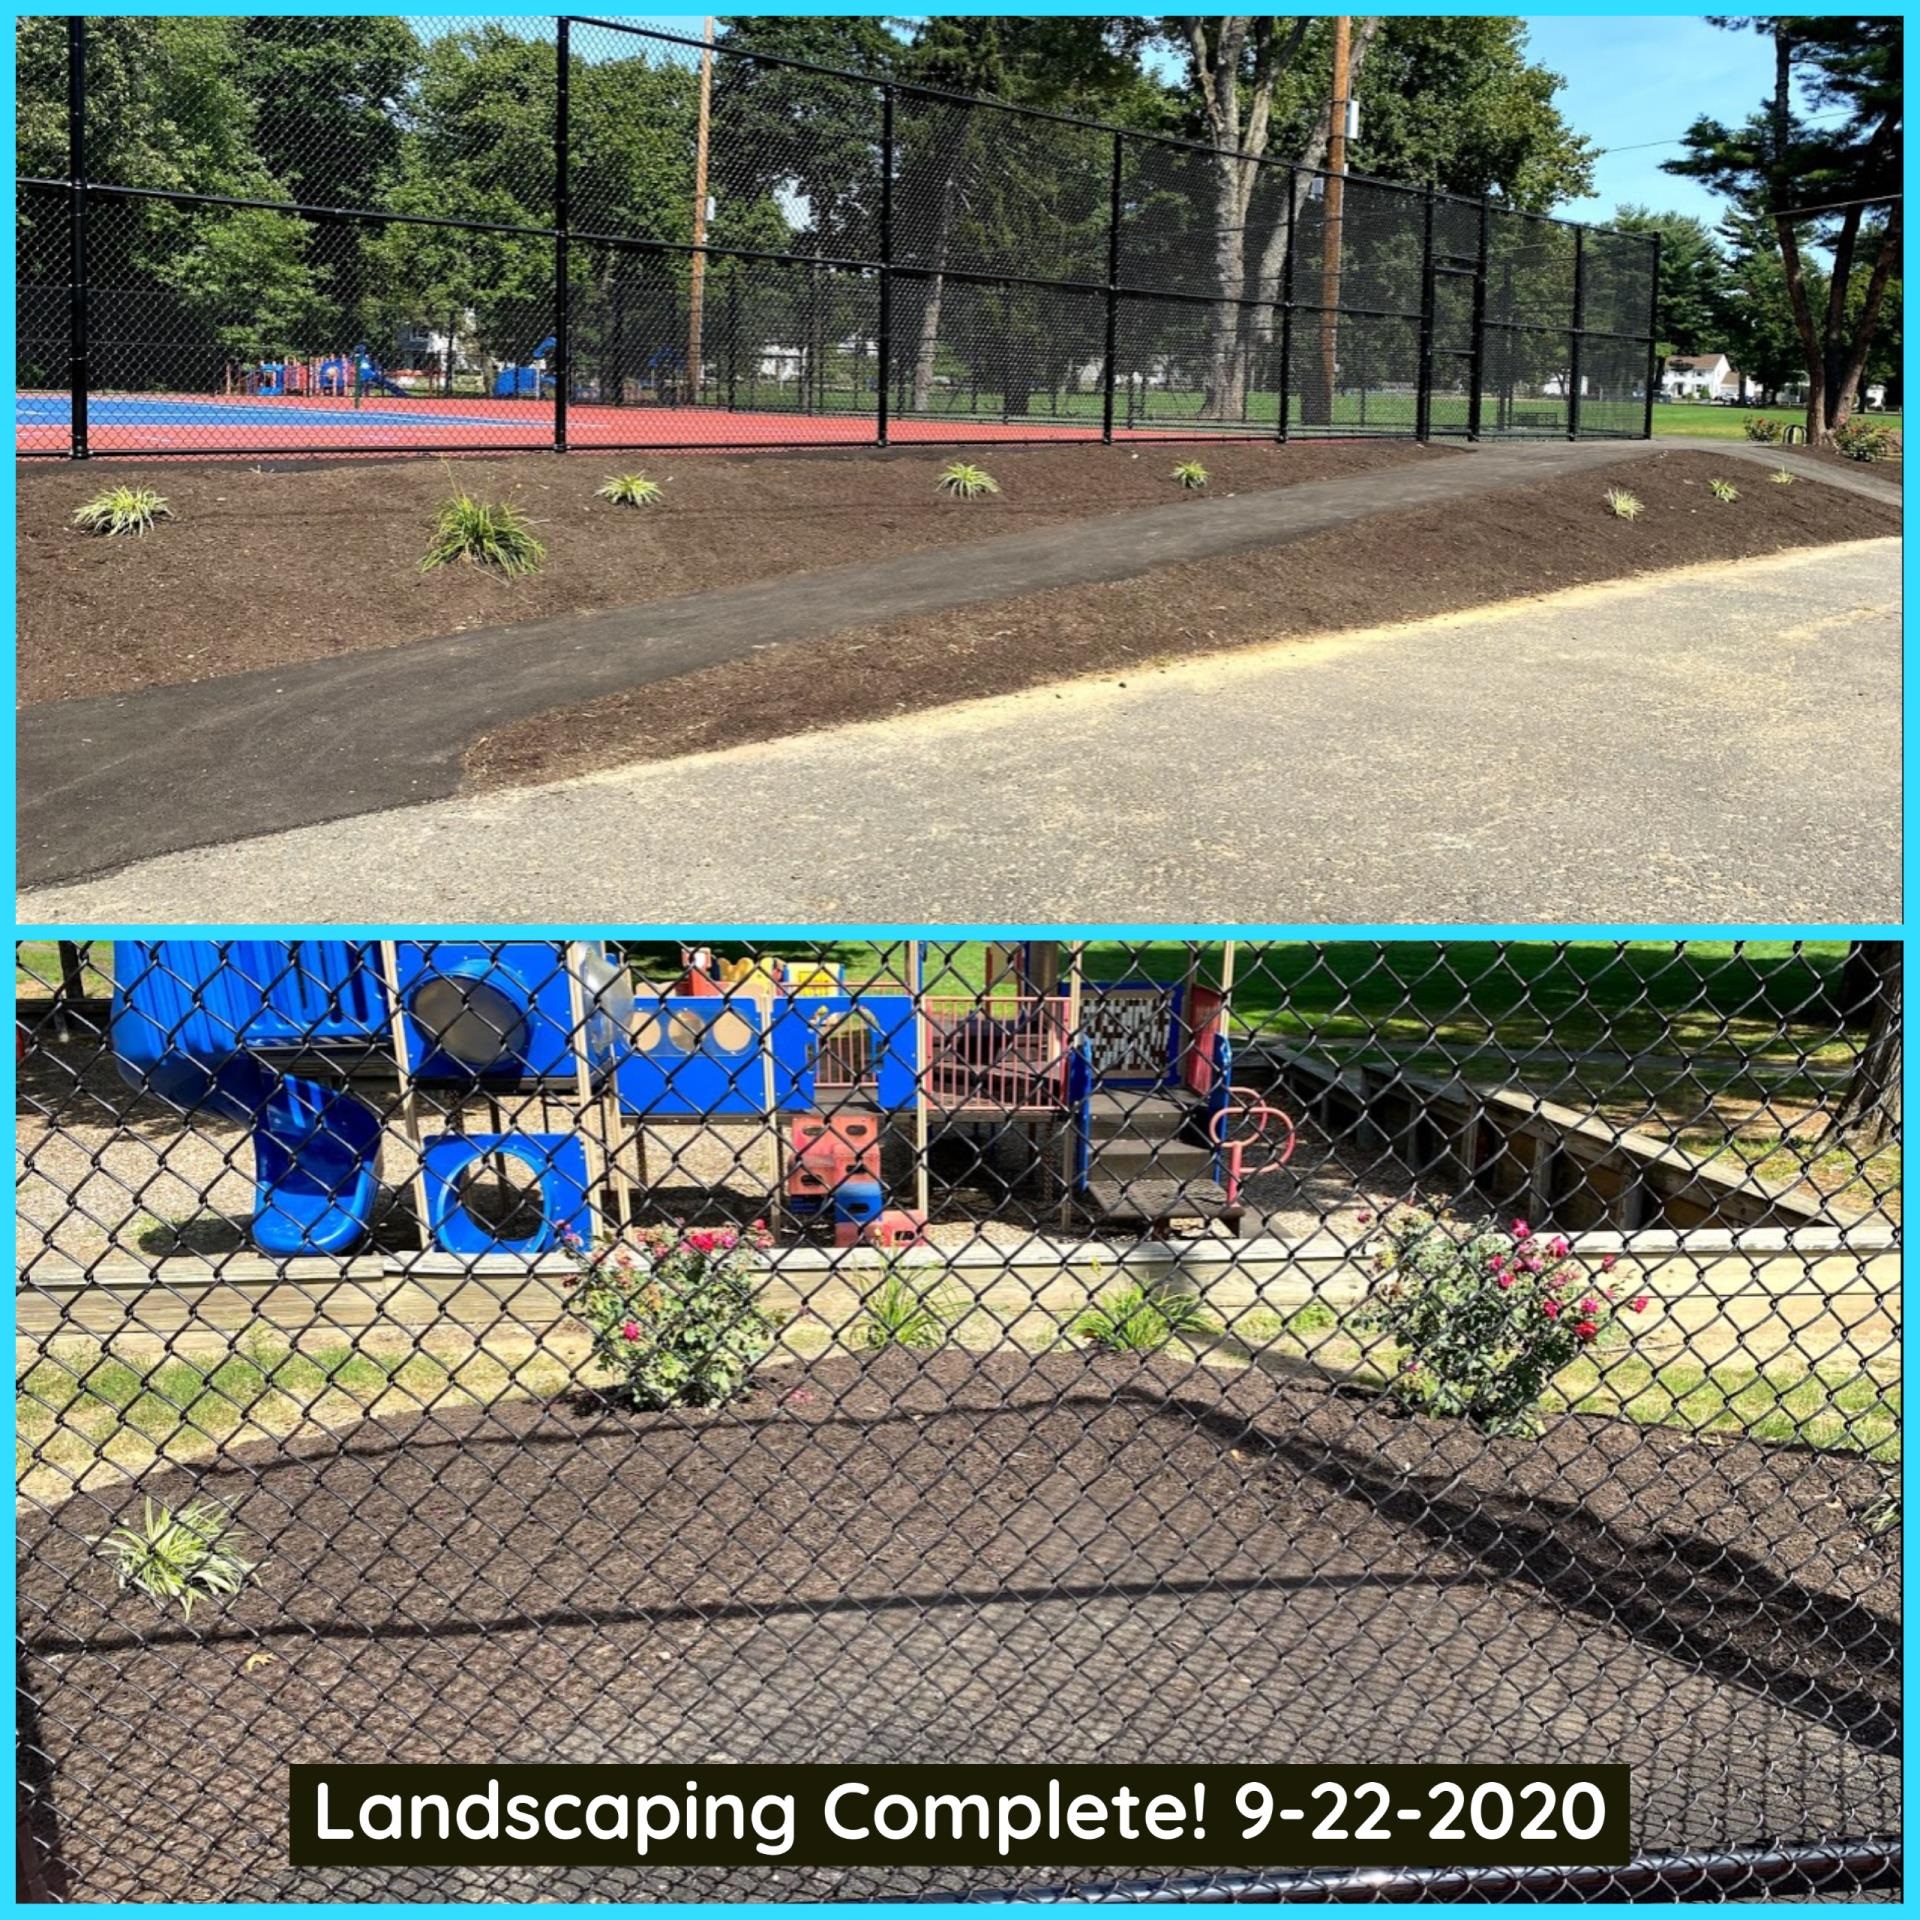 A completed landscaping